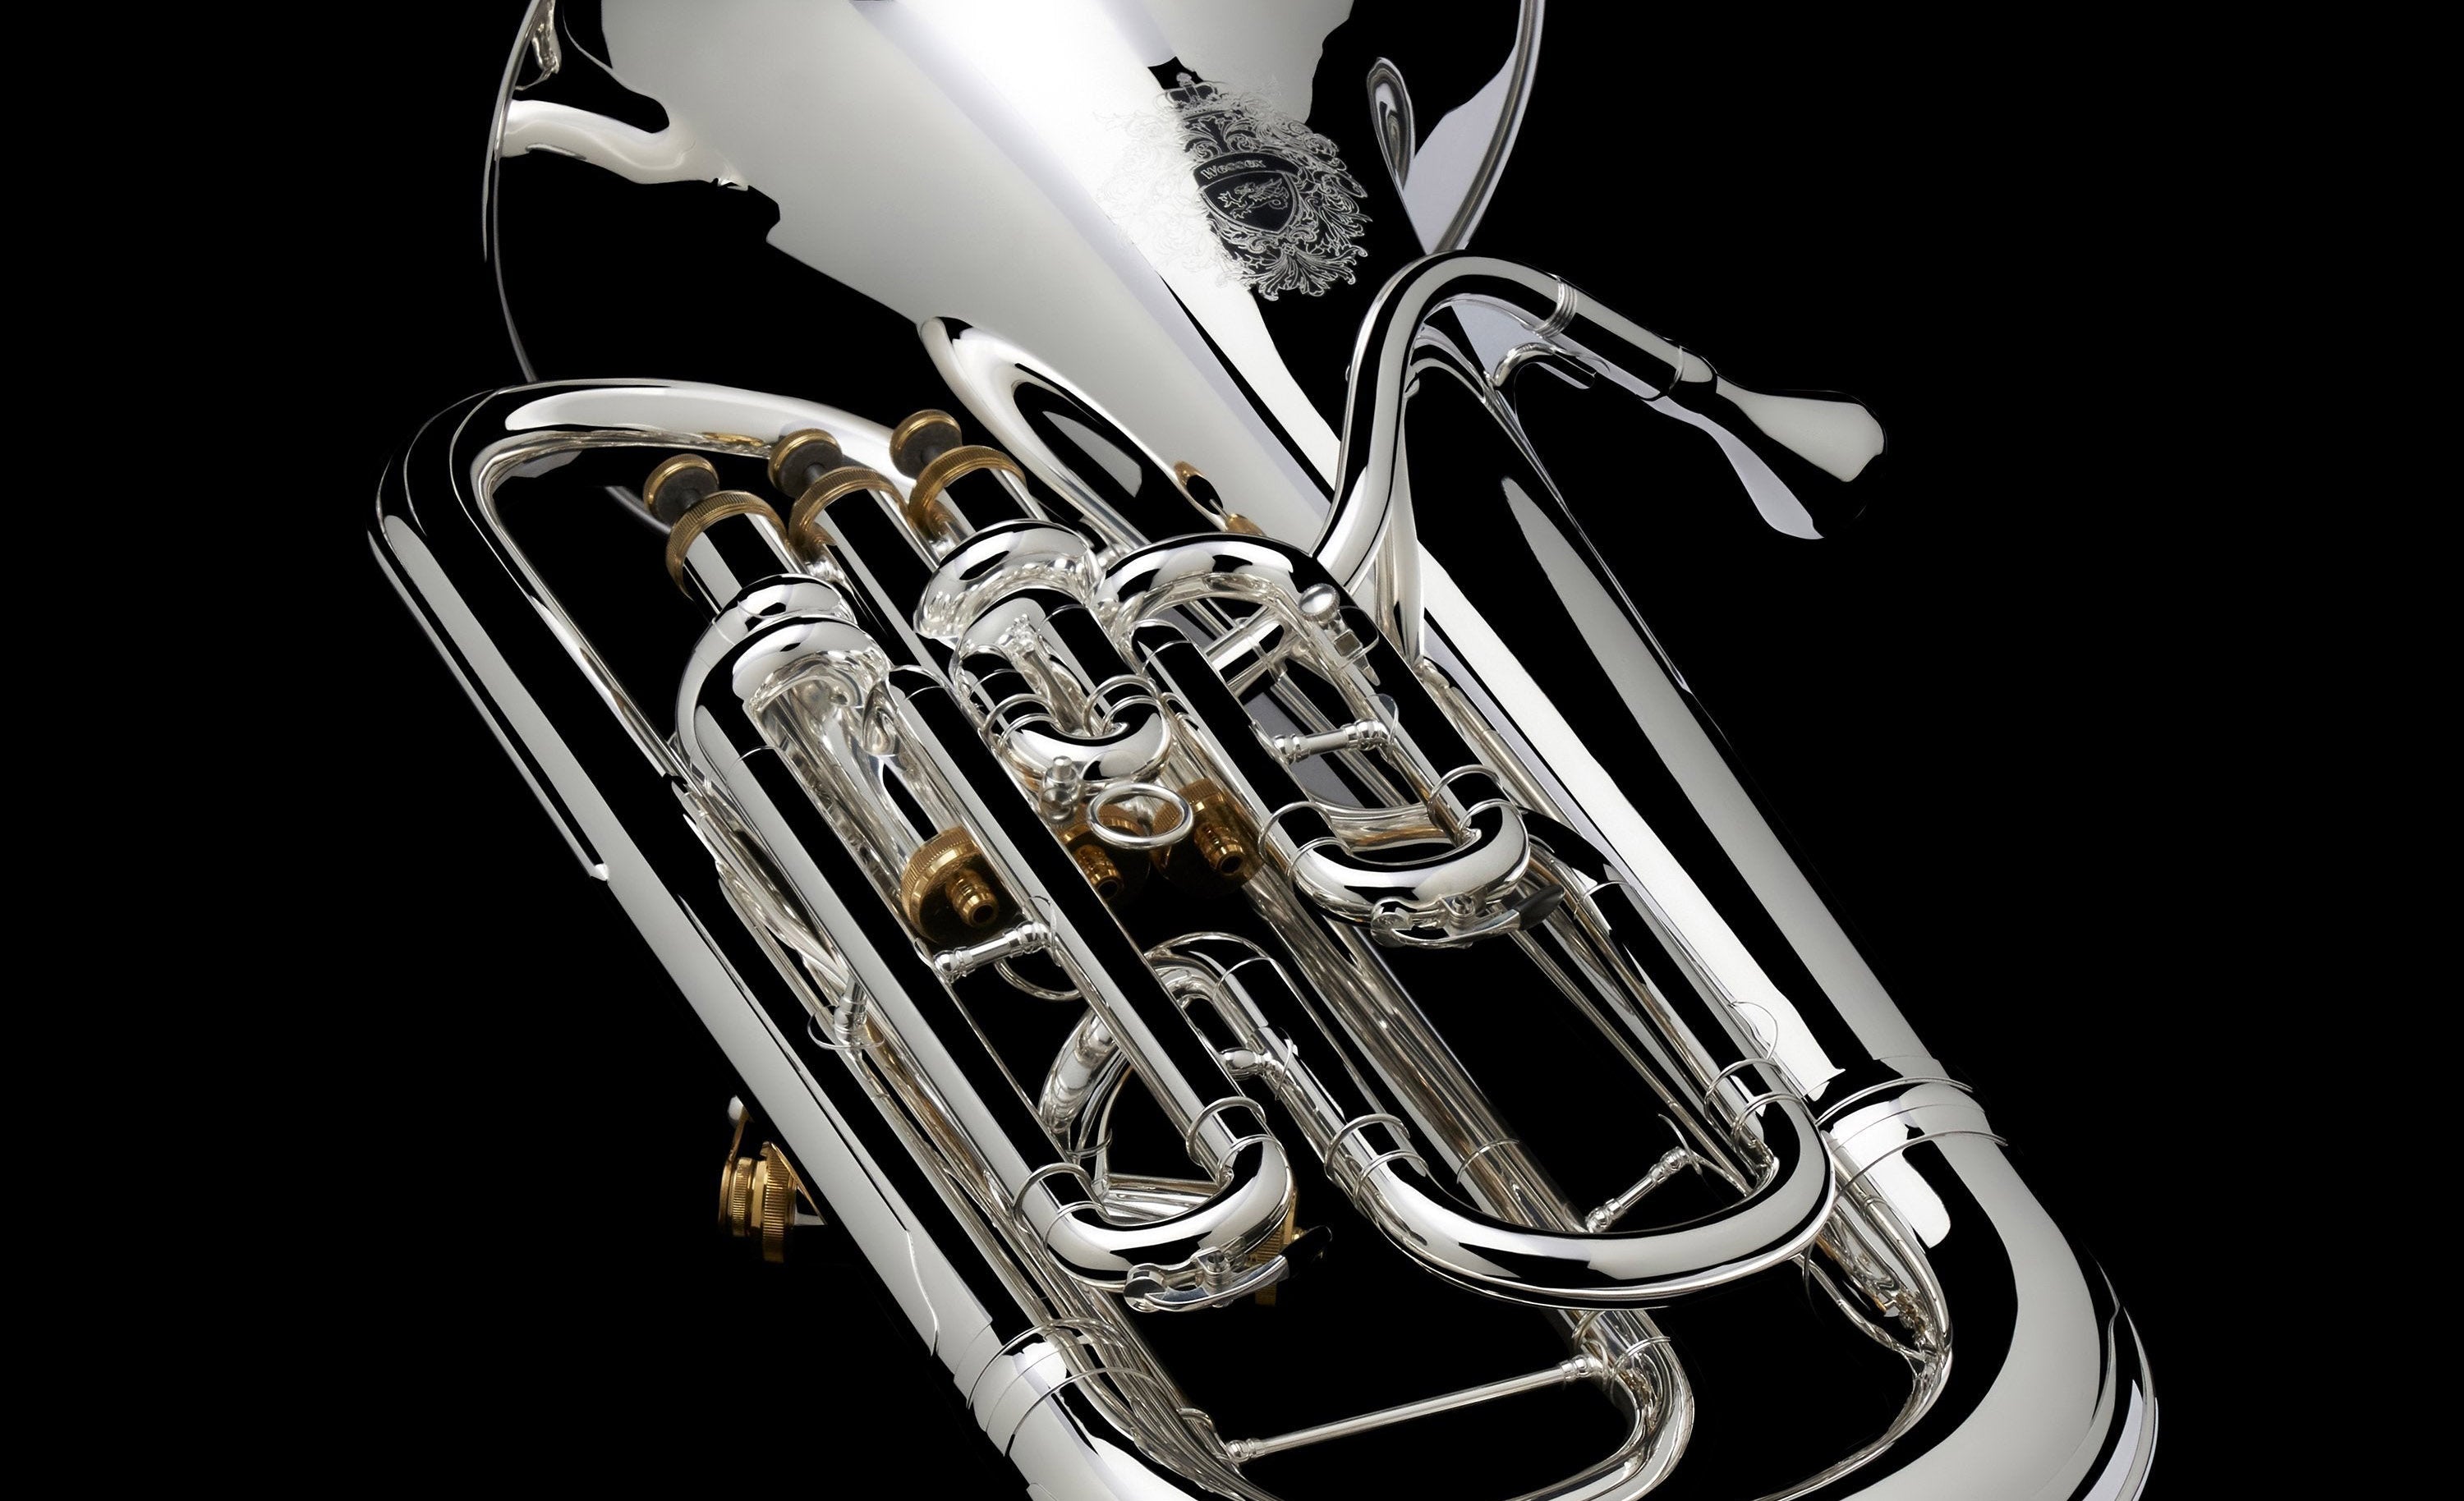 Bb Compensated Euphonium ‘Dolce’ - EP100 hero image